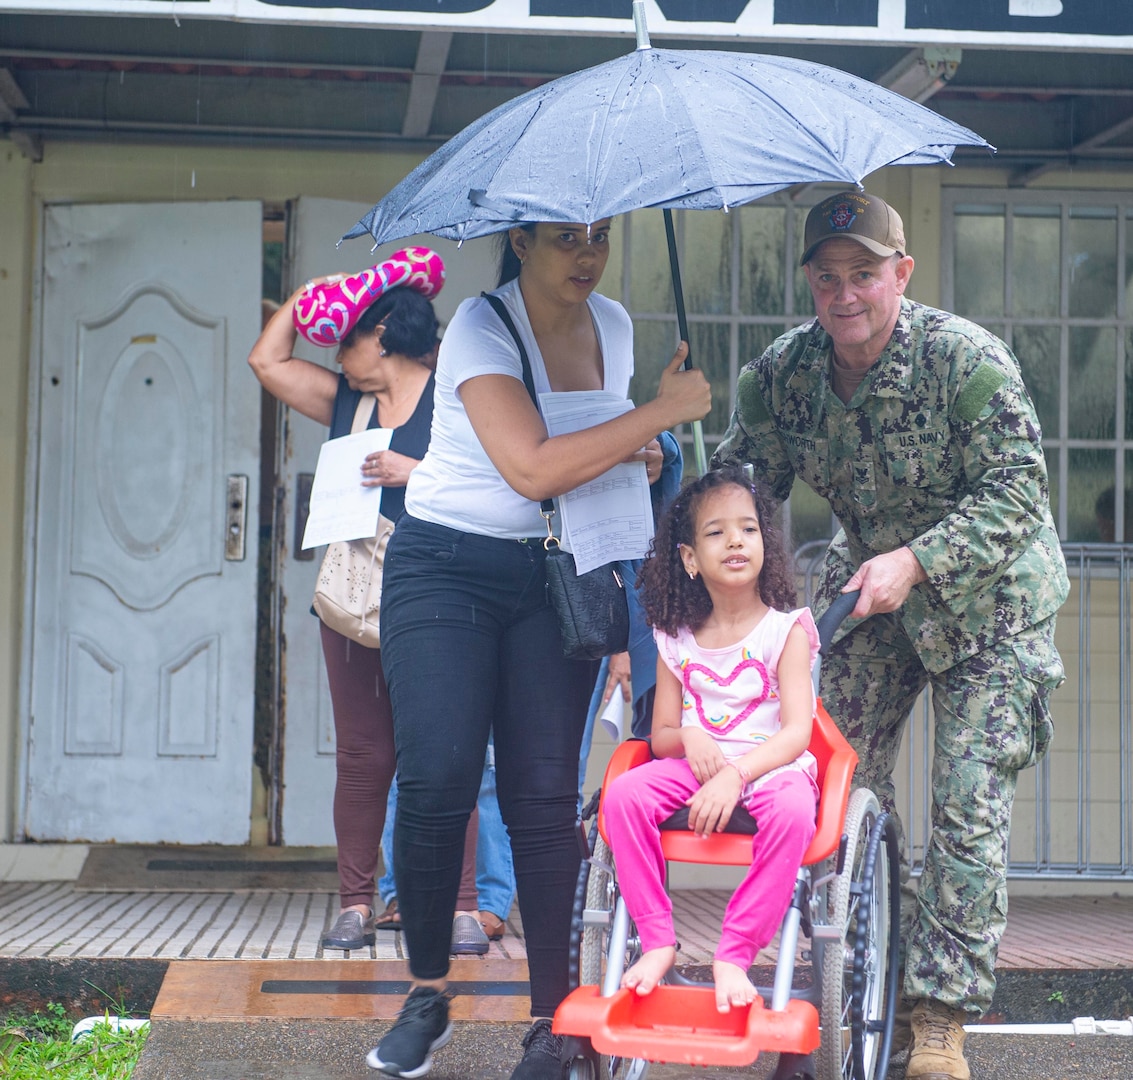 A military member pushes a child in a wheelchair.